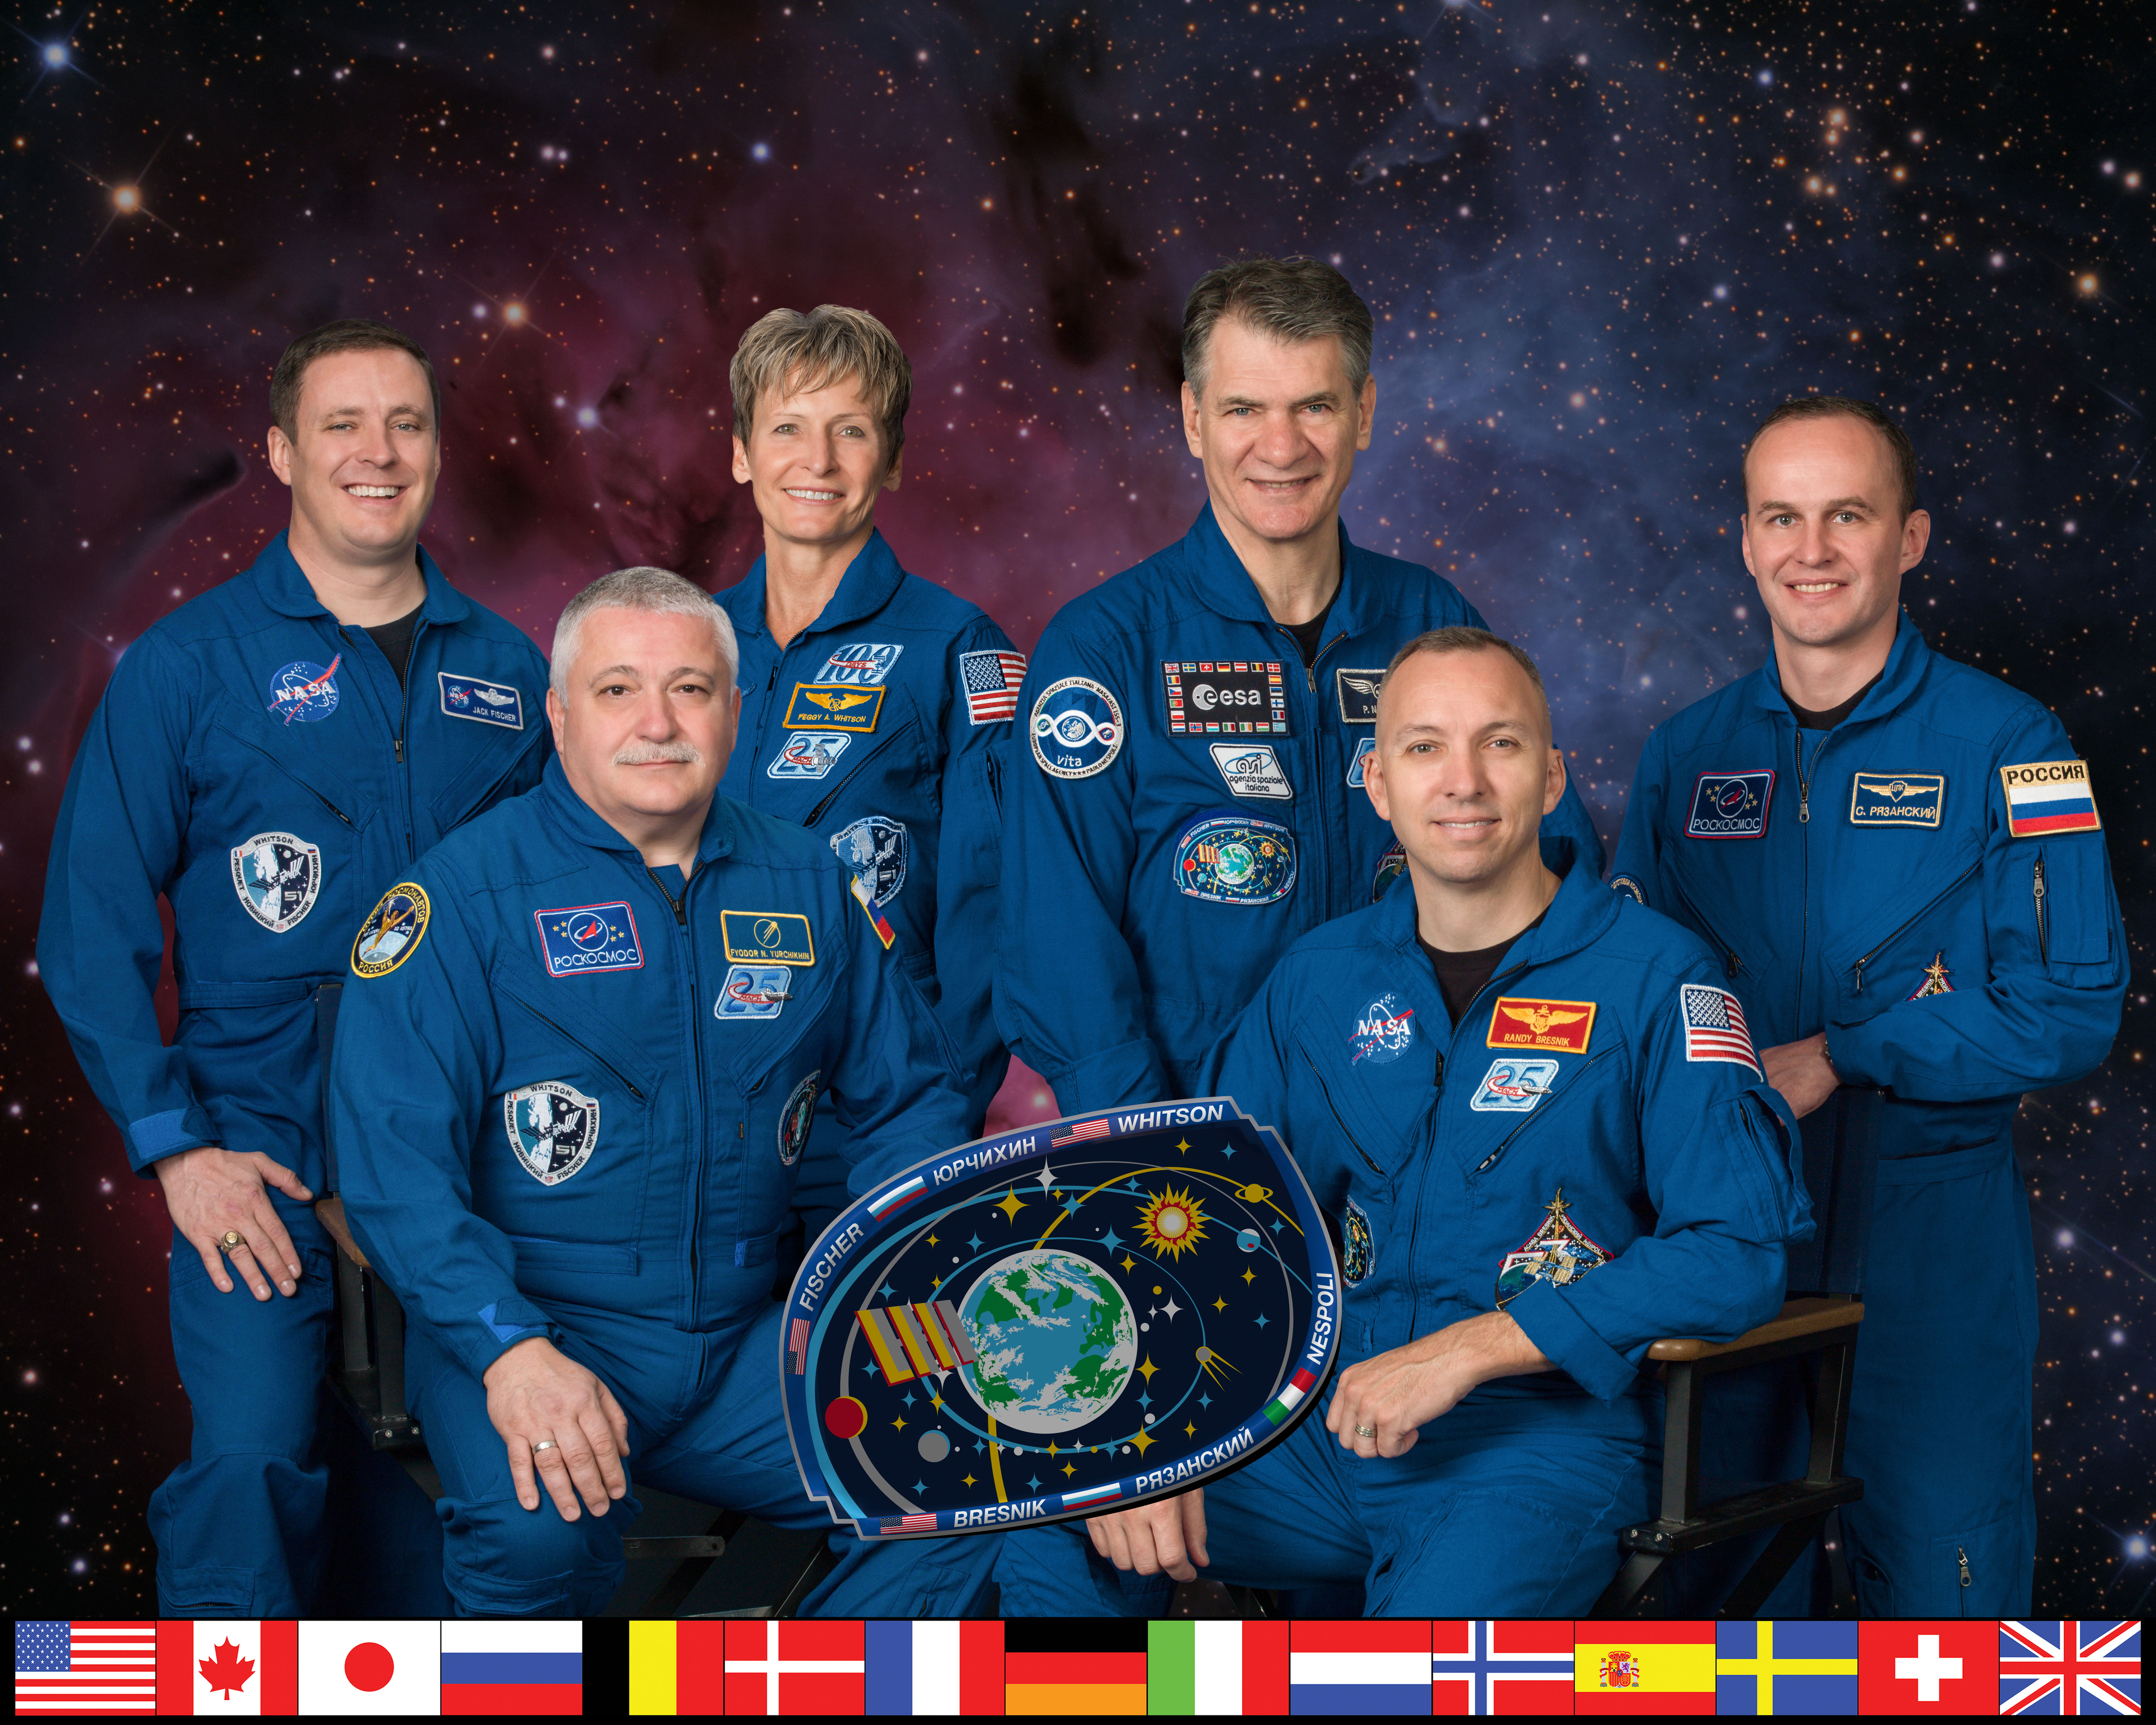 Expedition 52 Official Crew Portrait